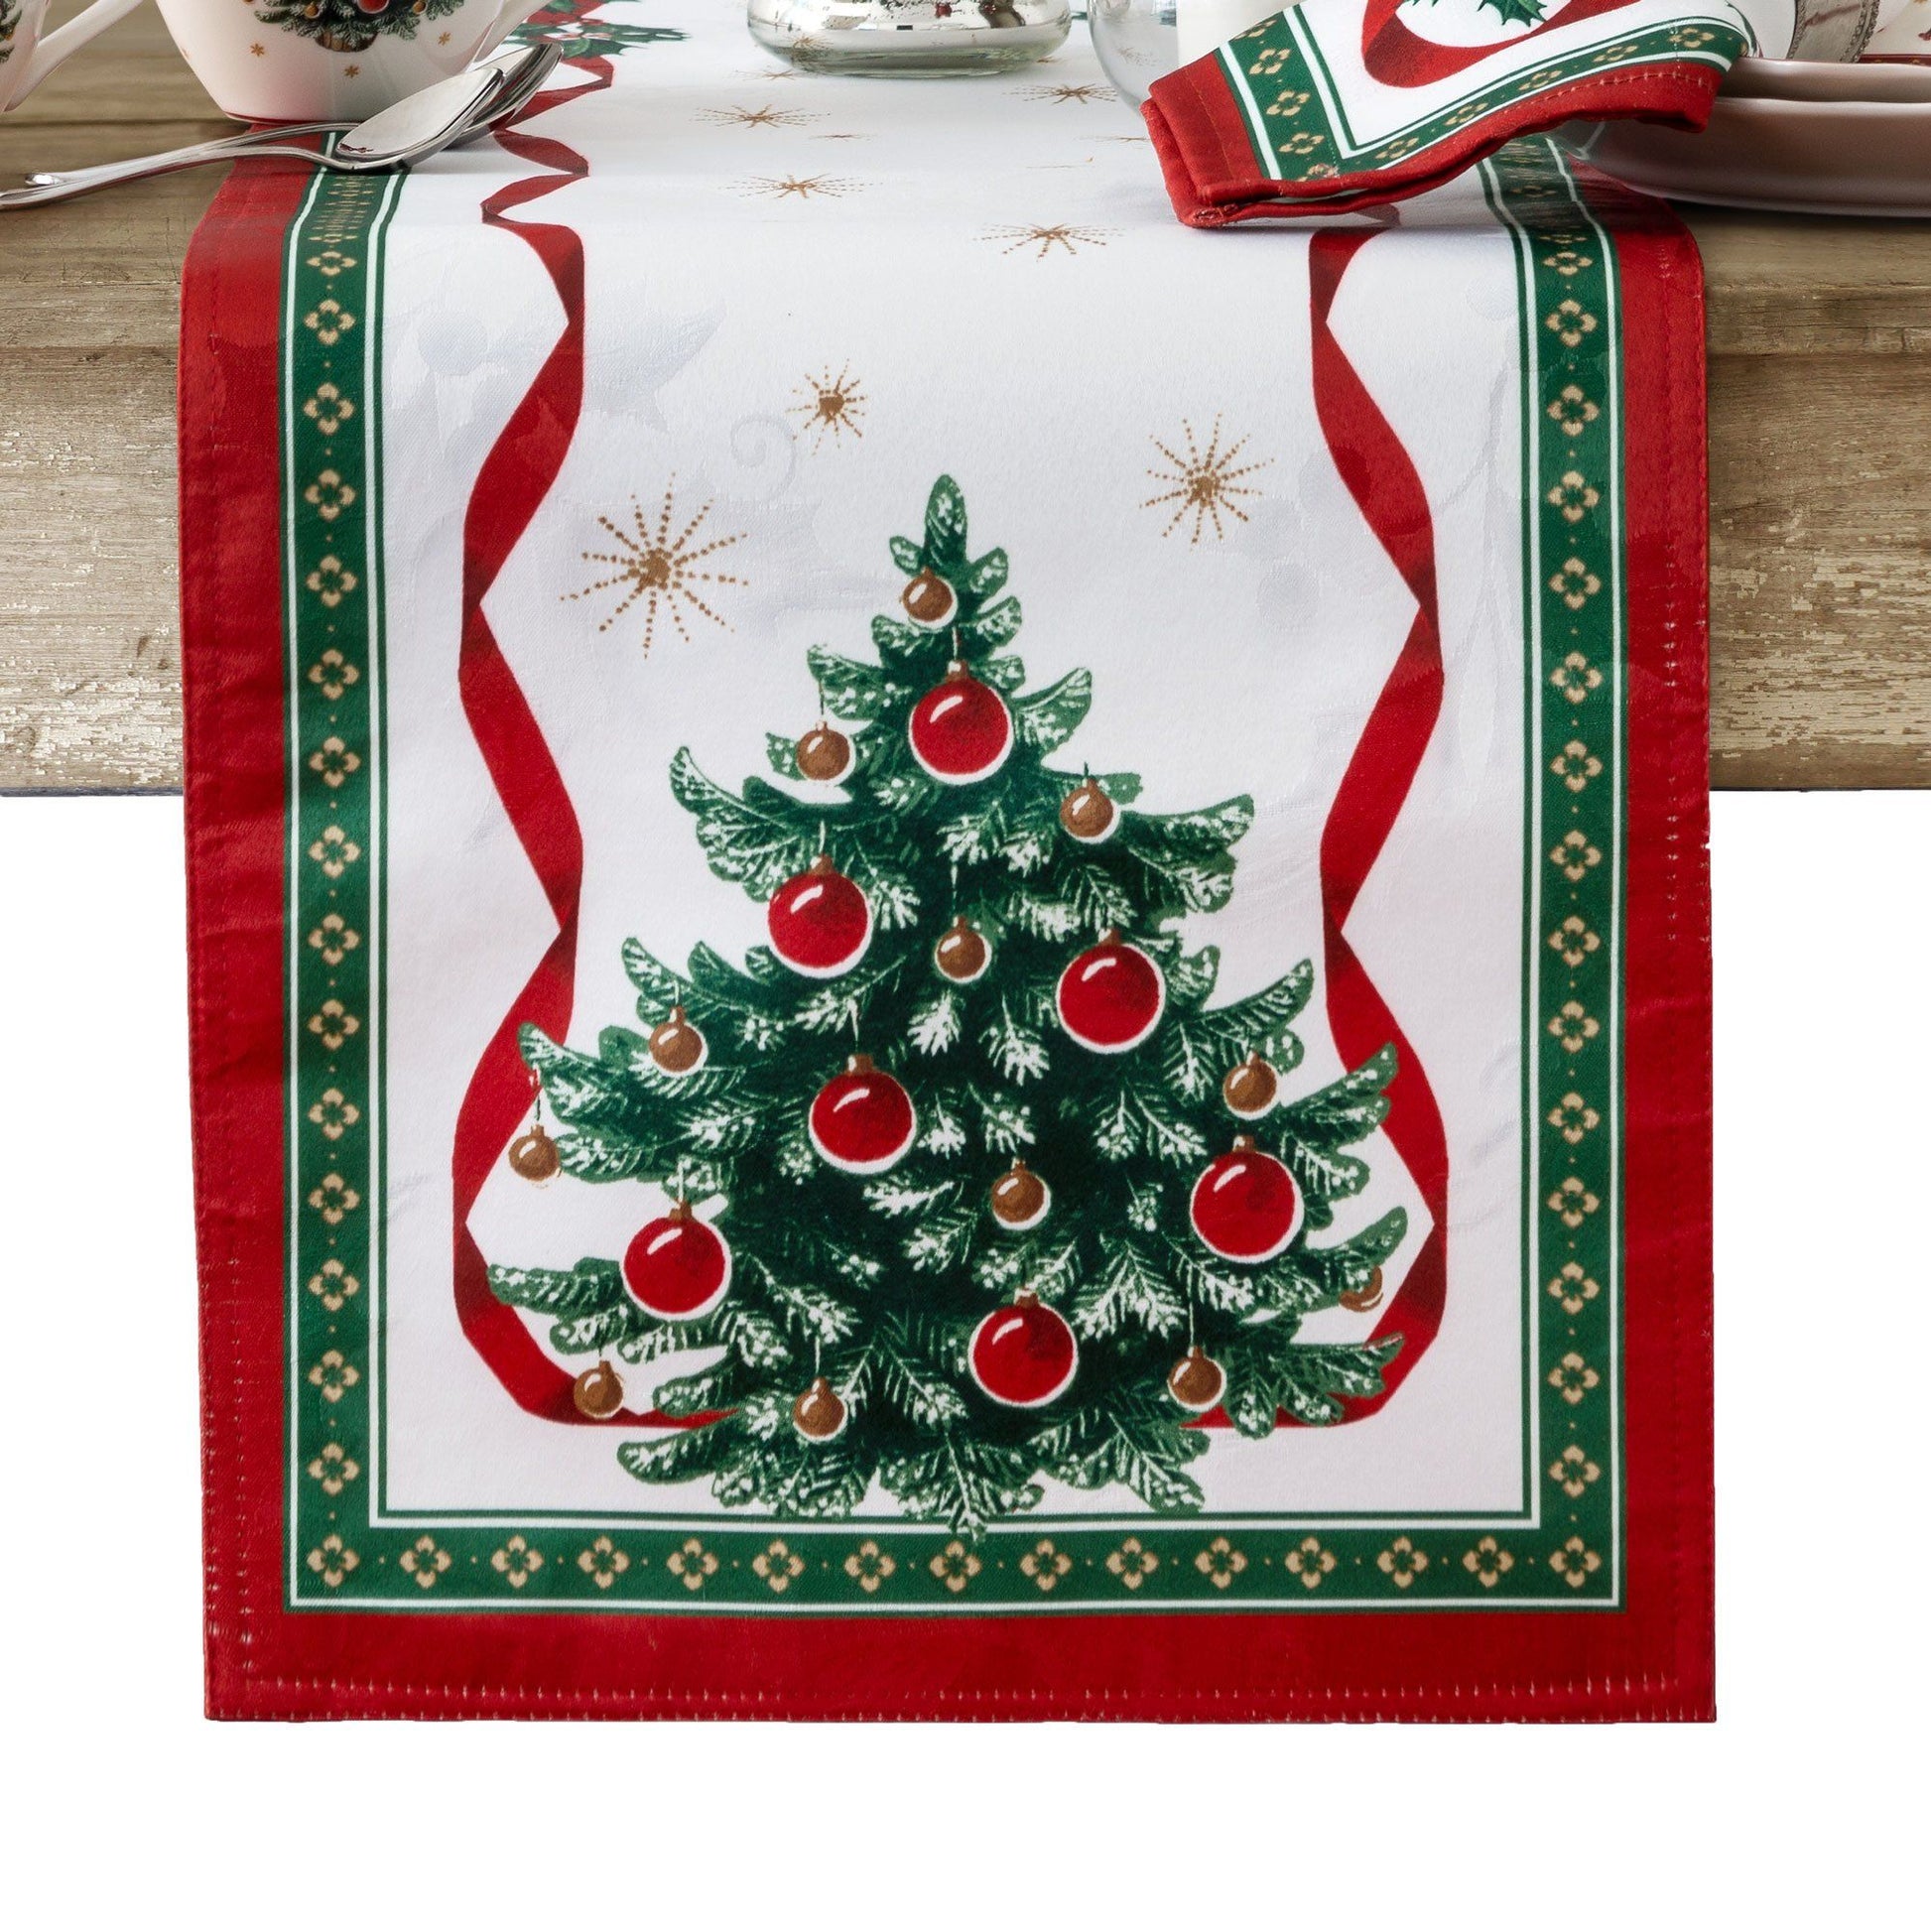 White holly damask runner with a Christmas tree design on each end. Entire runner is bordered in red/green and red ribbon design with holly sprigs.